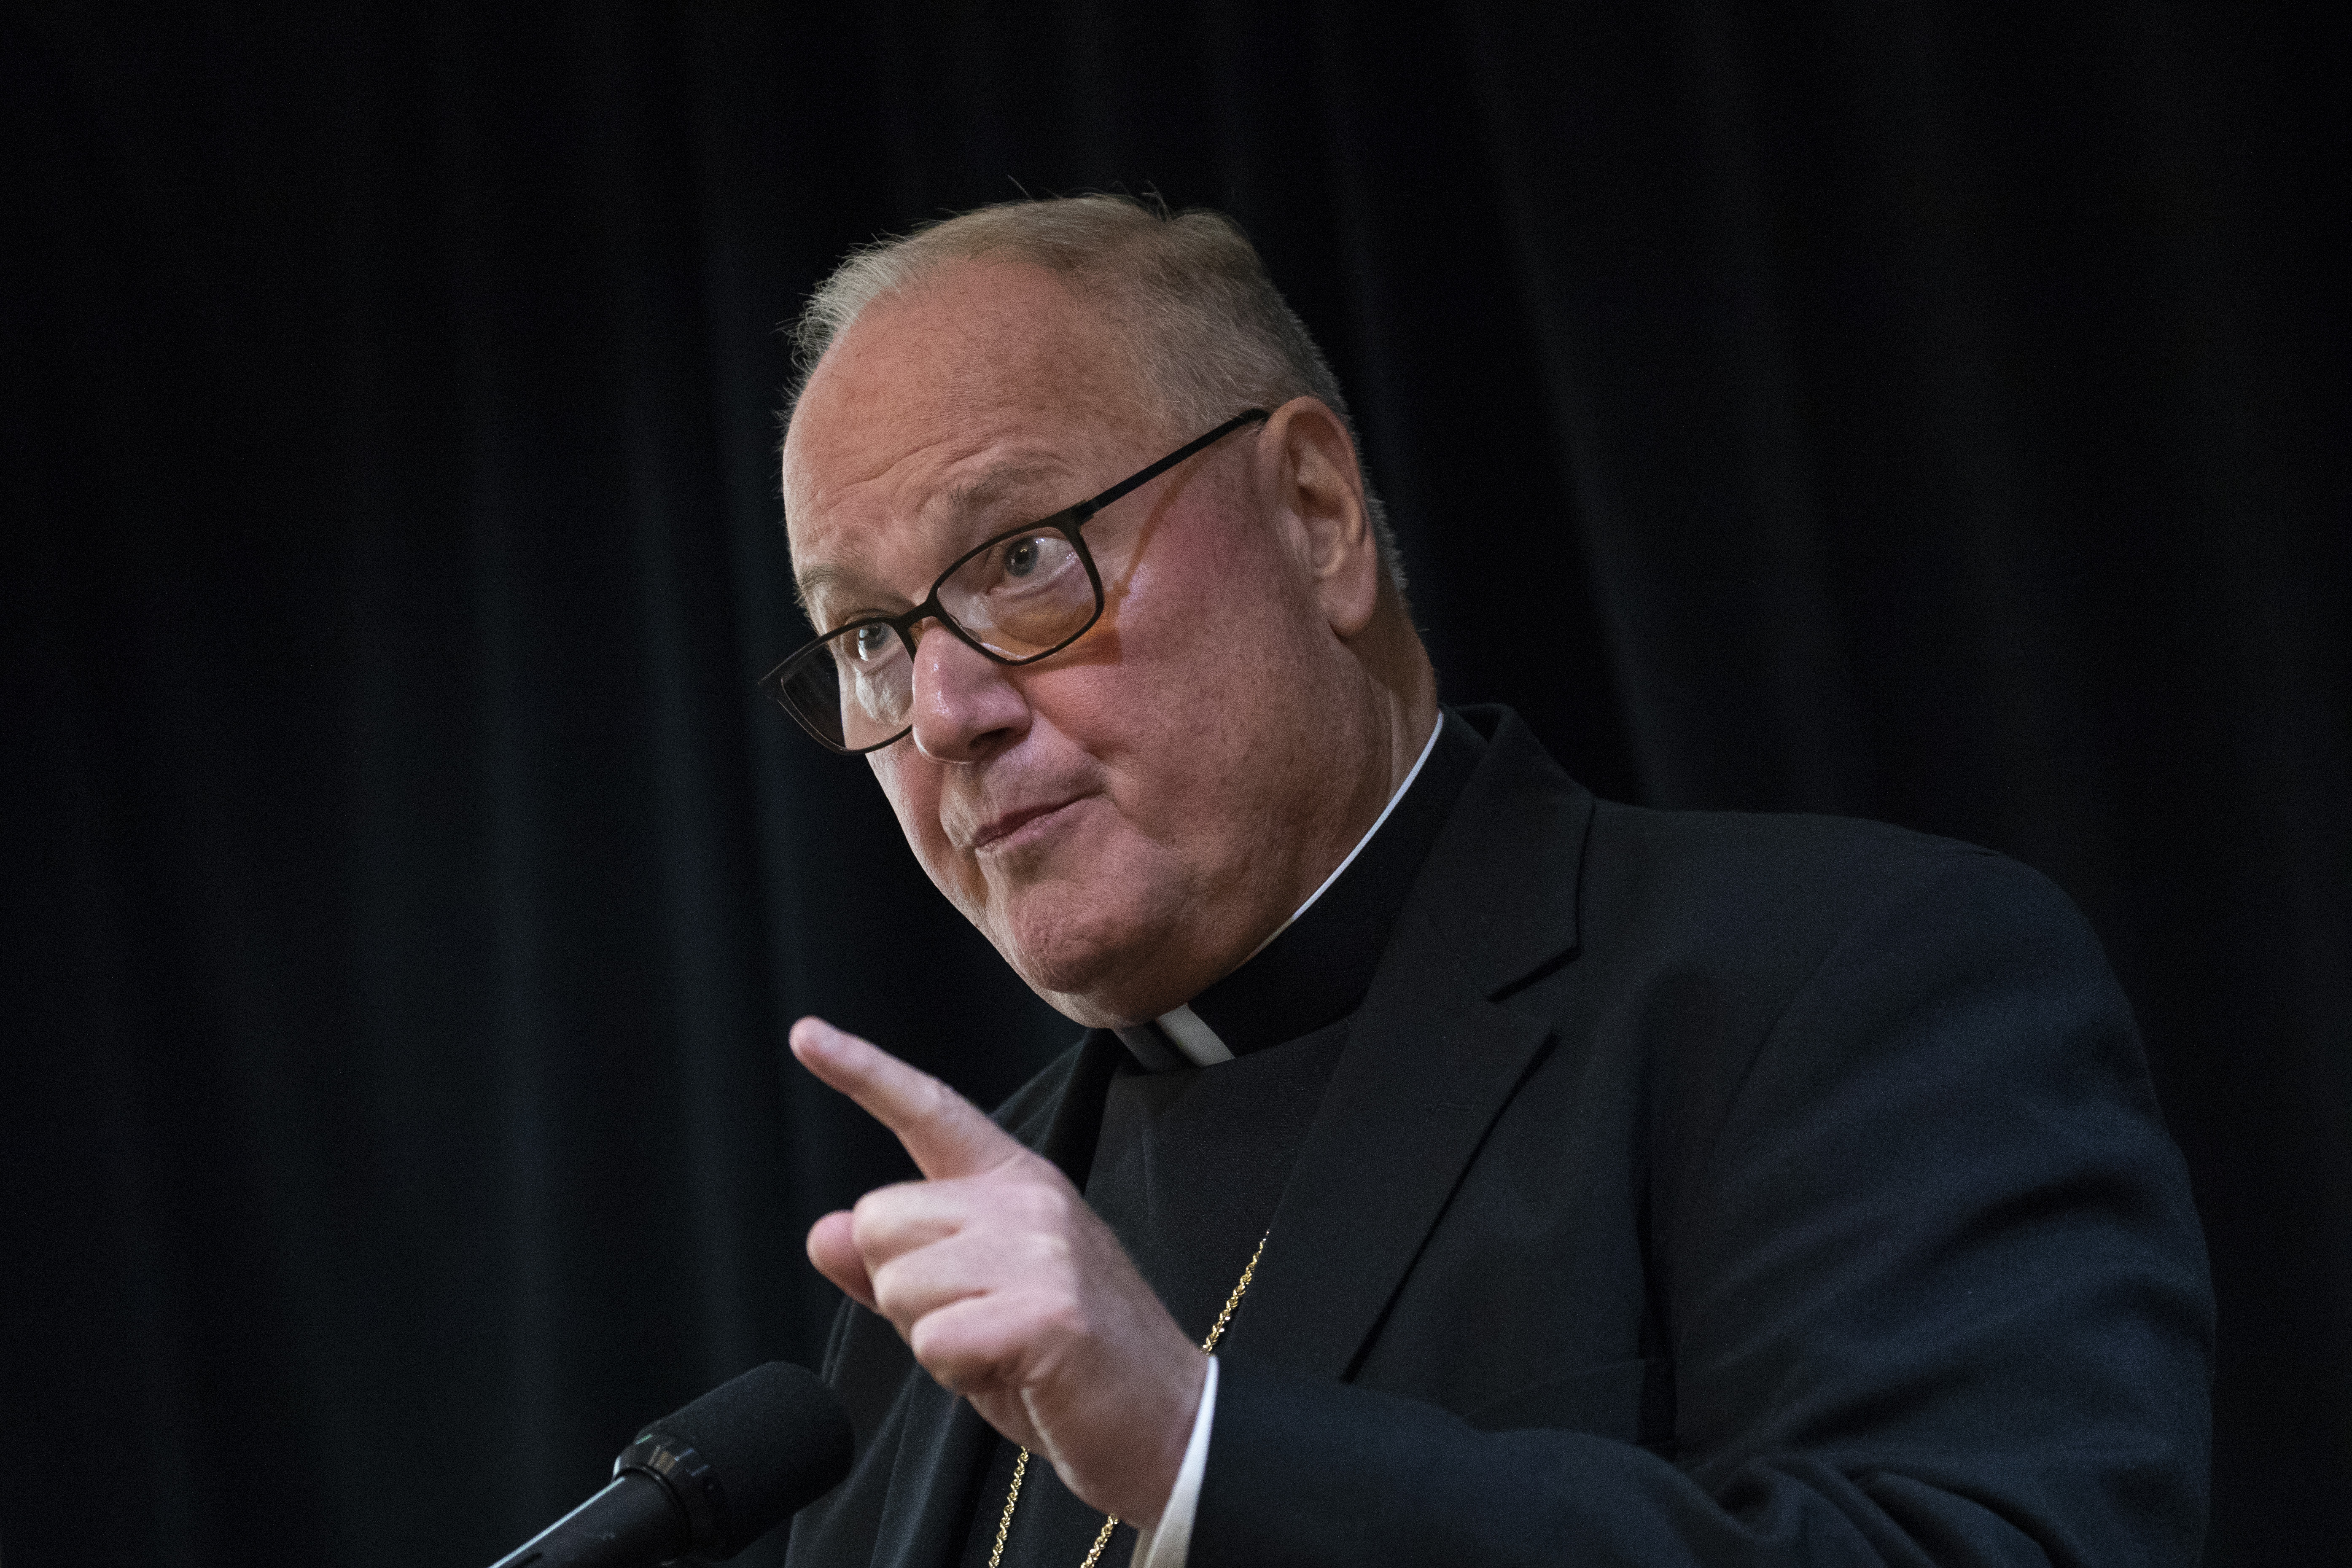 NEW YORK, NY - SEPTEMBER 20: Cardinal Timothy Dolan, archbishop of New York, speaks during a news conference at the headquarters of the Archdiocese of New York, September 20, 2018 in New York City. (Photo by Drew Angerer/Getty Images)